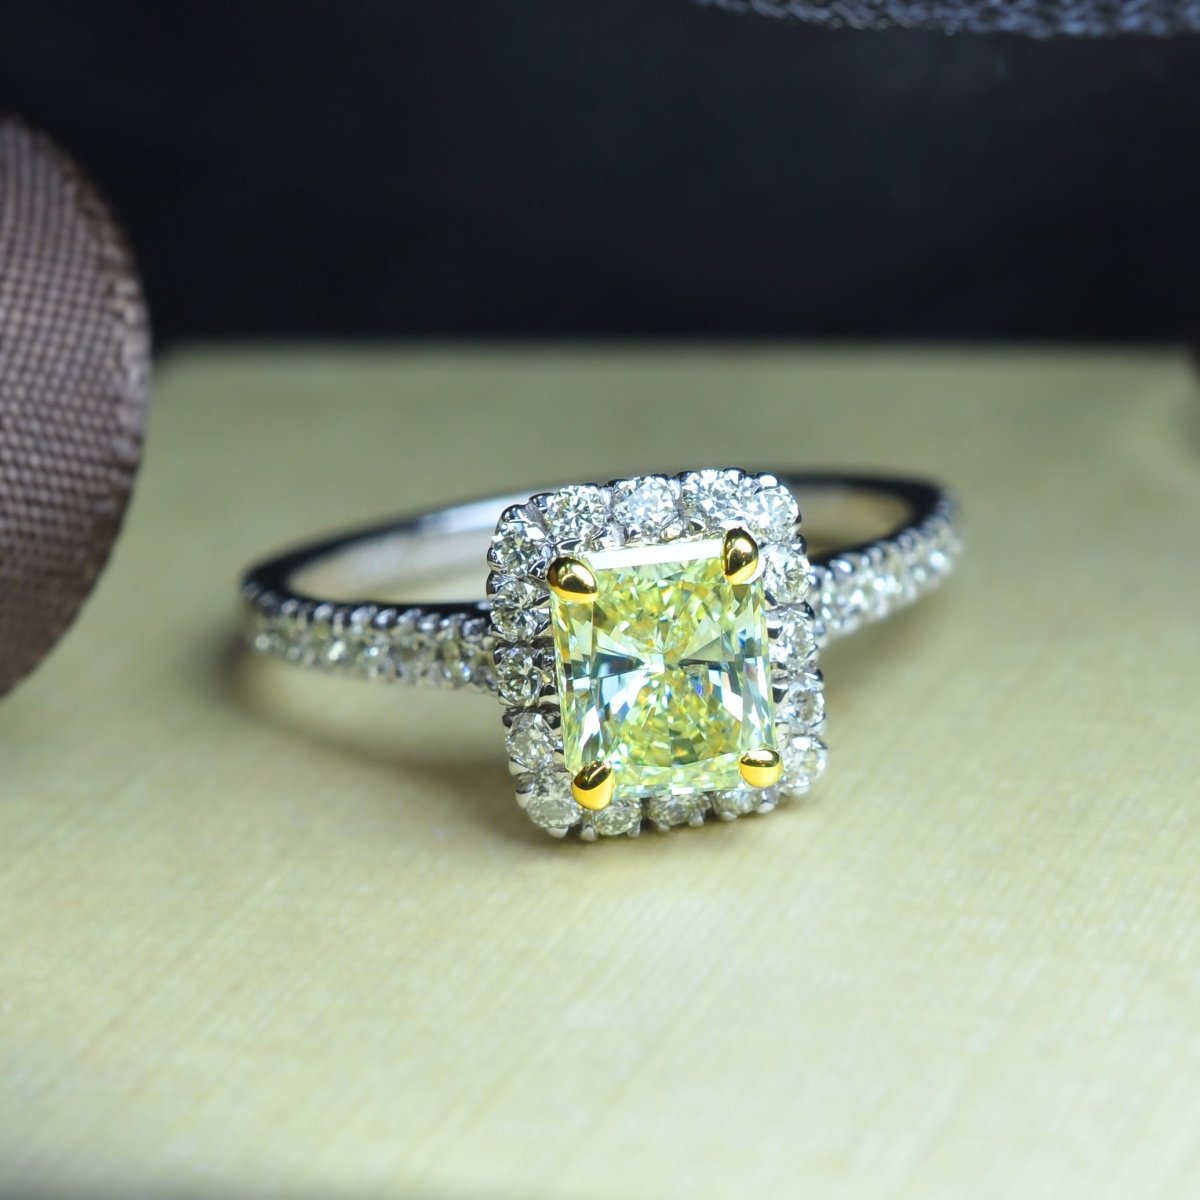 Classy 1.62CT Radiant and Round Cut Diamond Engagement Ring in 18KT Two Tone Gold - Primestyle.com